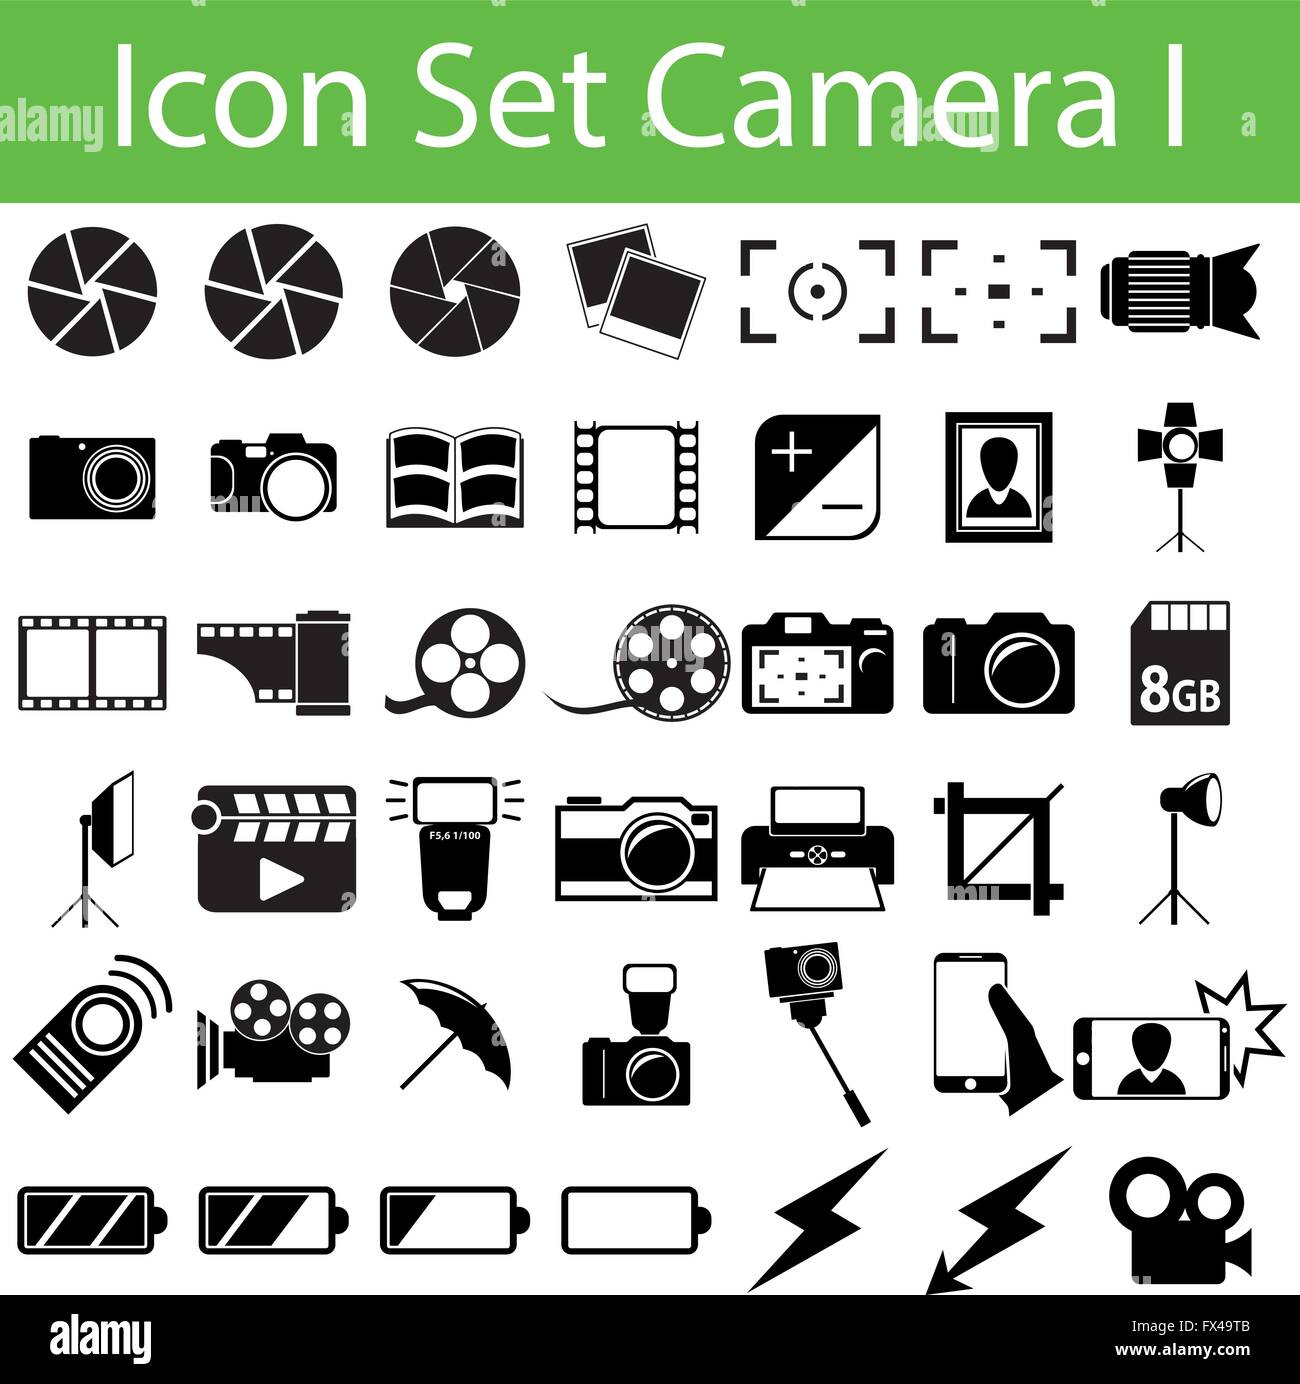 Icon Set Camera I with 42 icons for different purchase Stock Vector